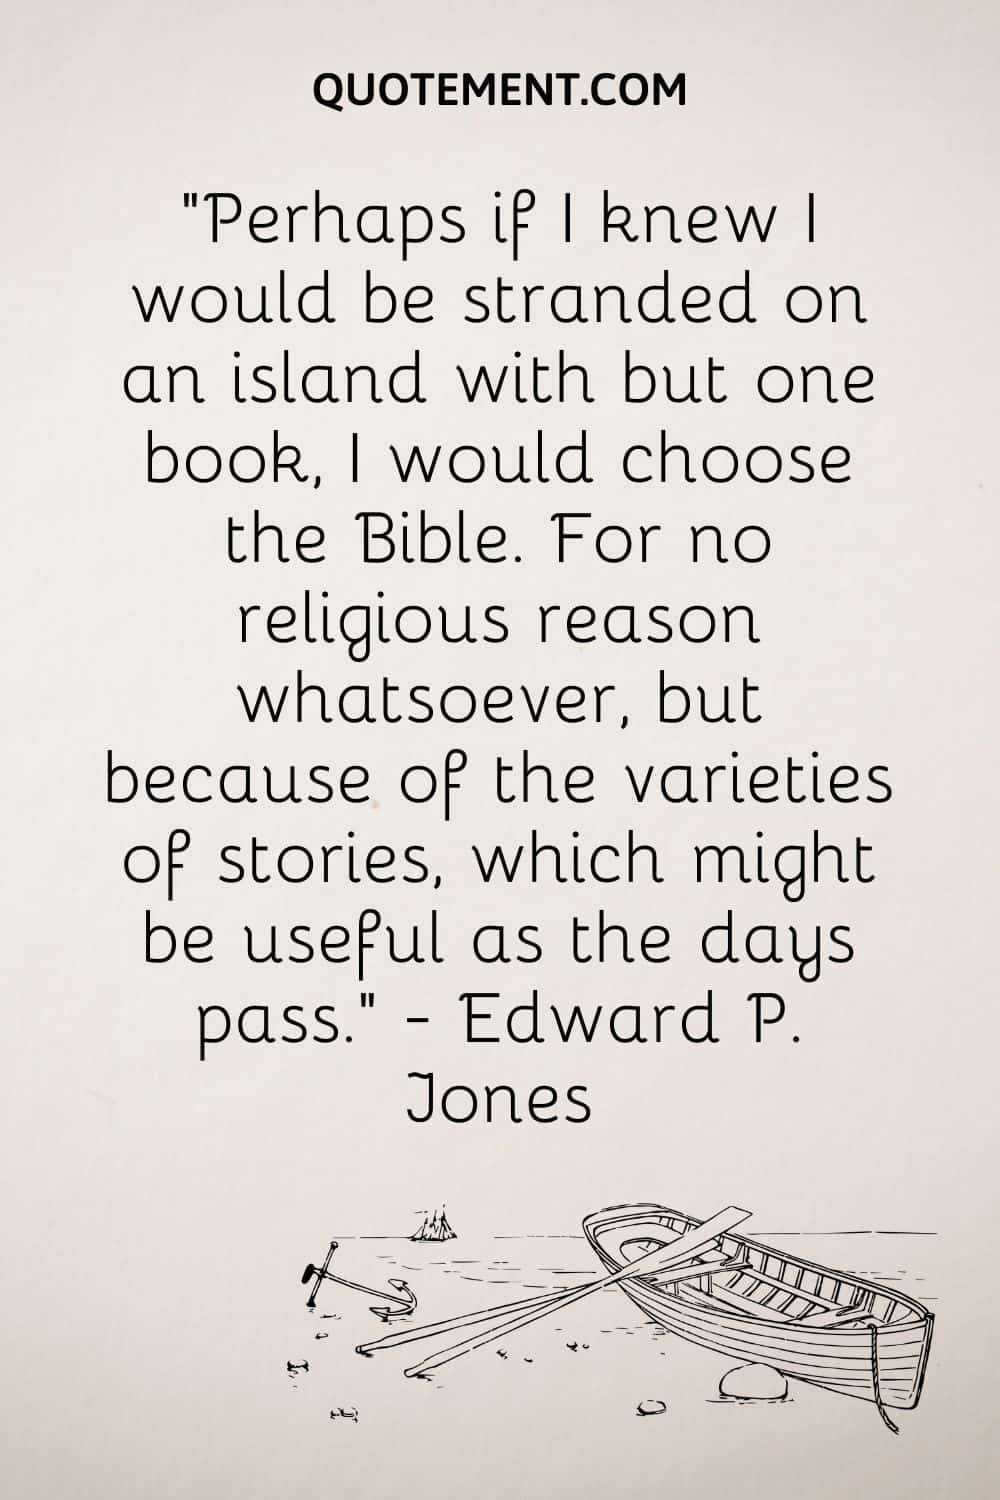 “Perhaps if I knew I would be stranded on an island with but one book, I would choose the Bible.